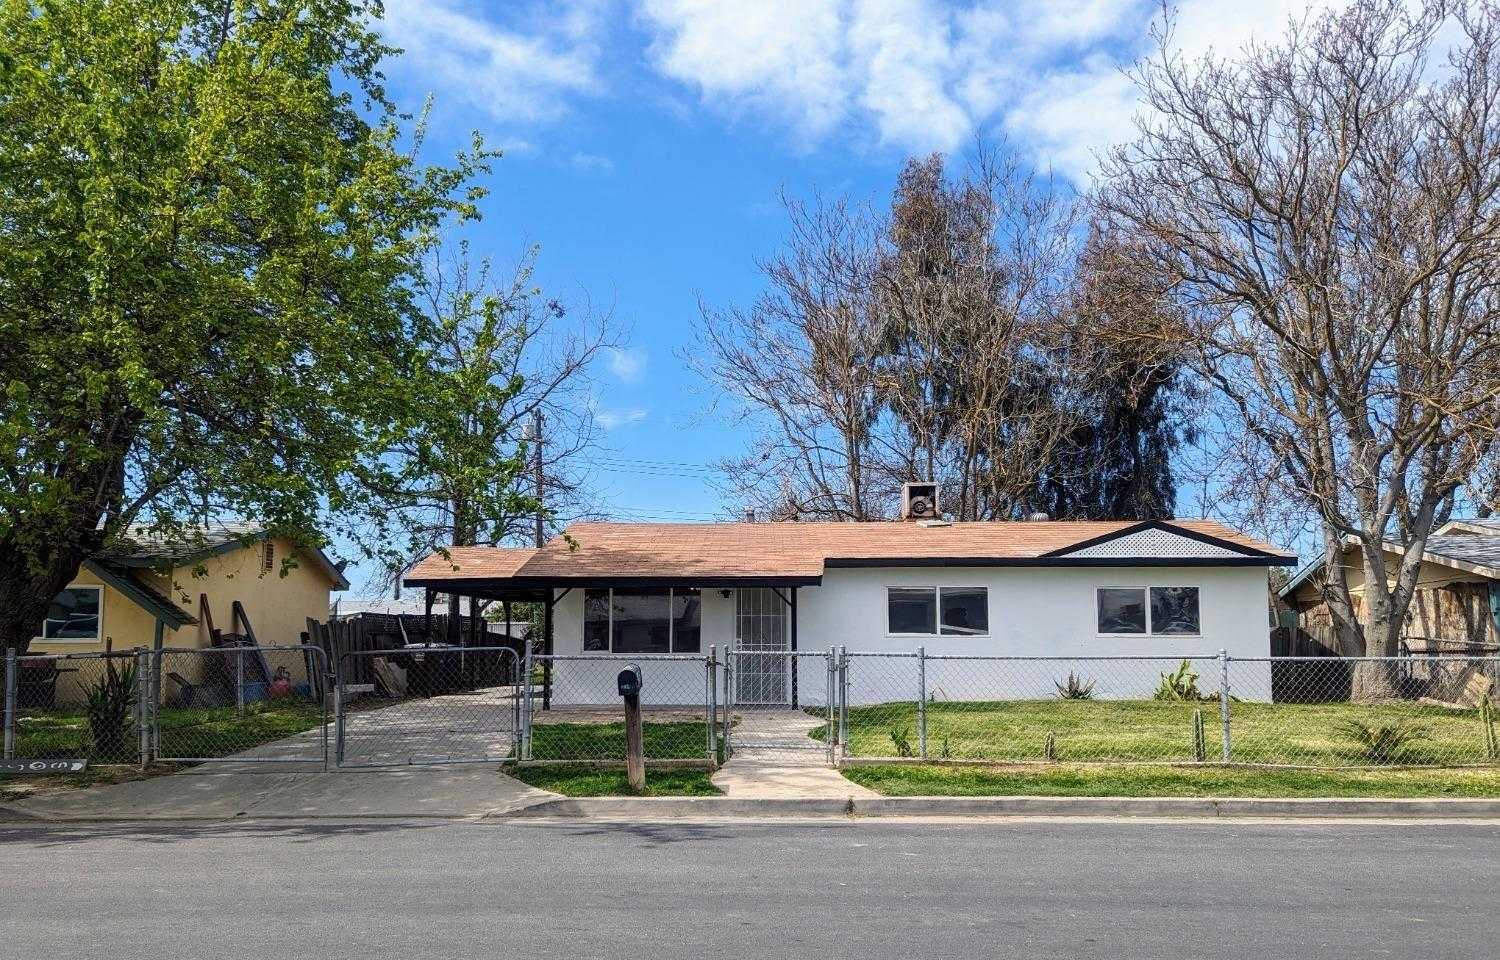 $235,000 - 3Br/1Ba -  for Sale in Hanford